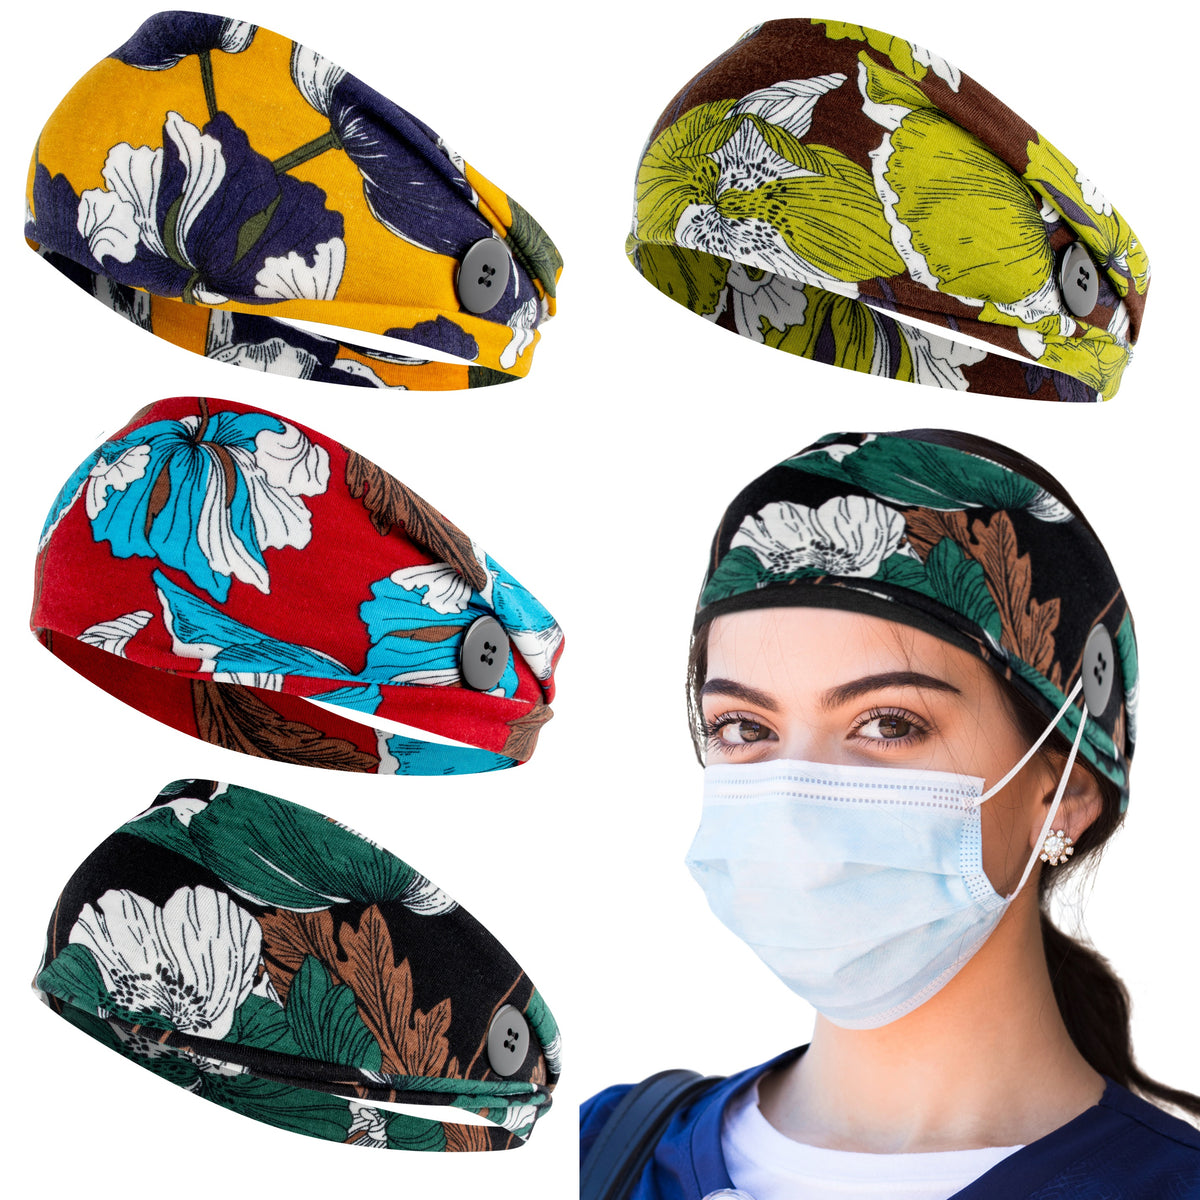 Headbands With Buttons For Mask, Nurse Headbands Non Slip With Ear Savers - Vivid Blooms - First Lifesaver